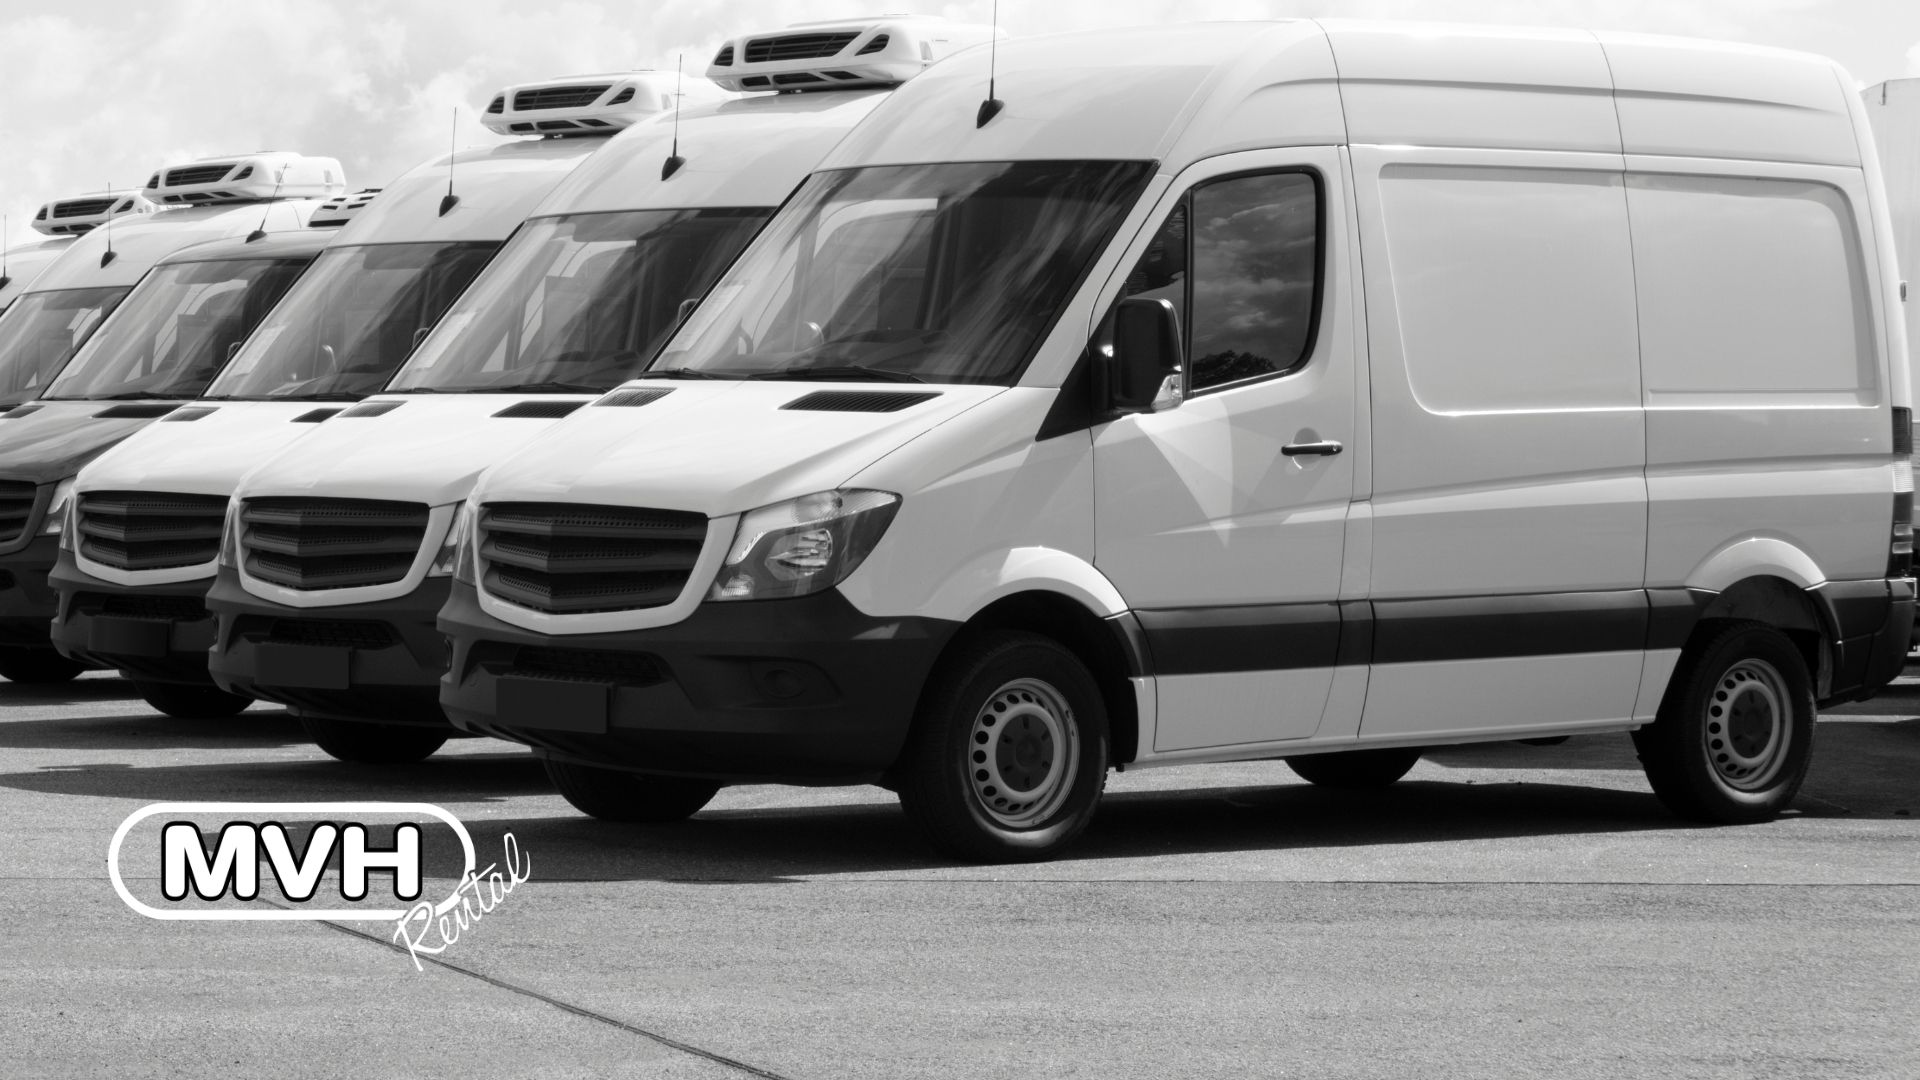 Need to choose between a regular transit van and a box-shaped Luton van? Learn everything you need to know about what makes Lutons so special.